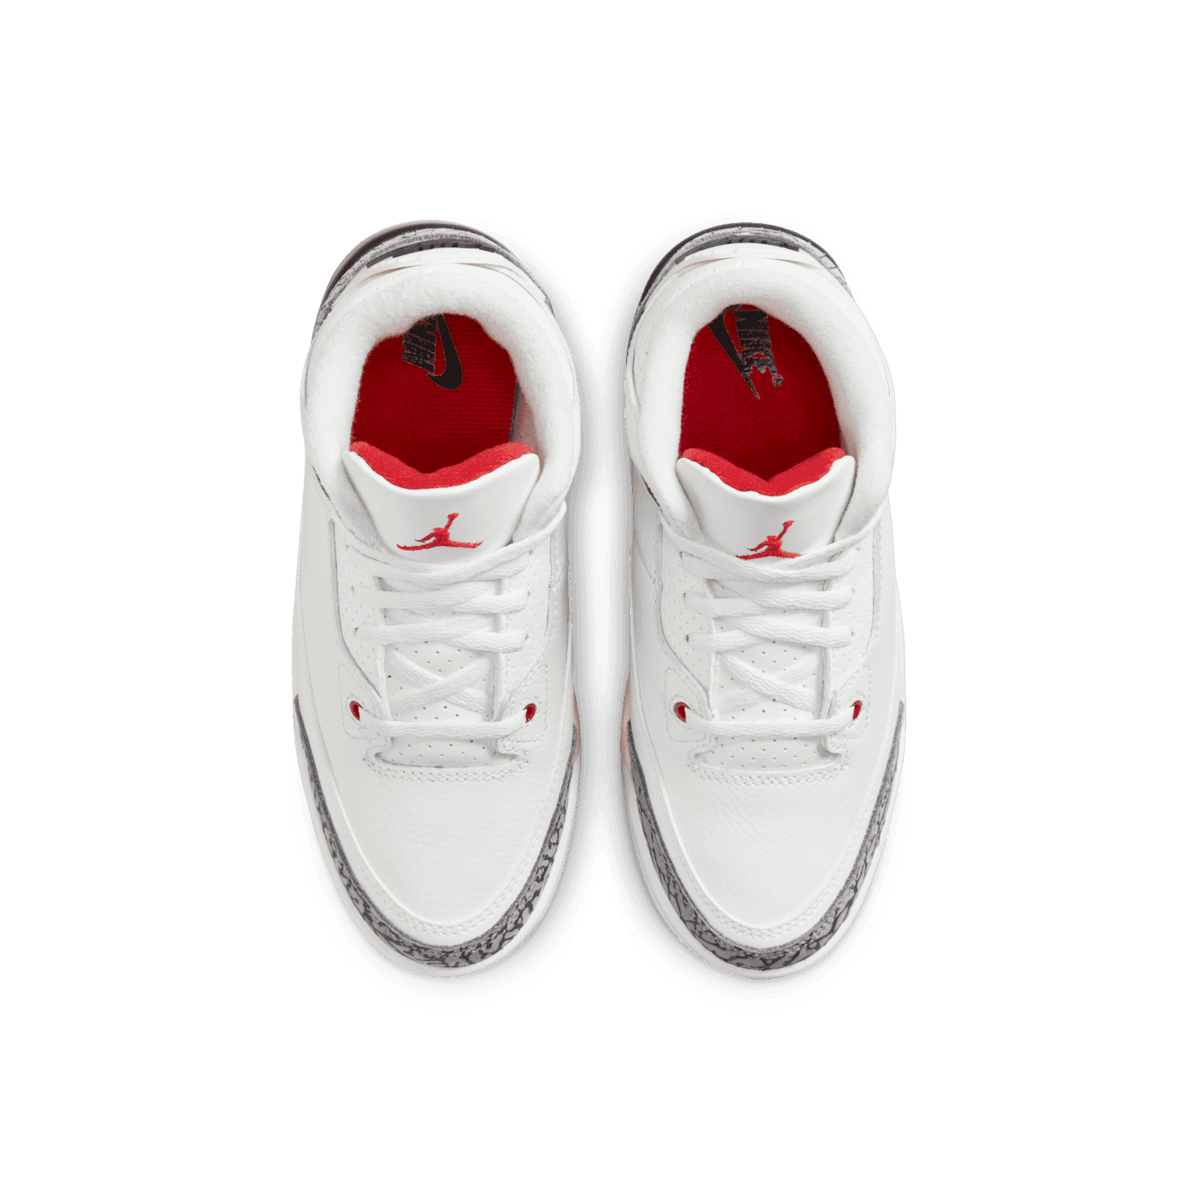 Air Jordan 3 Reimagined White Cement (PS) Angle 1